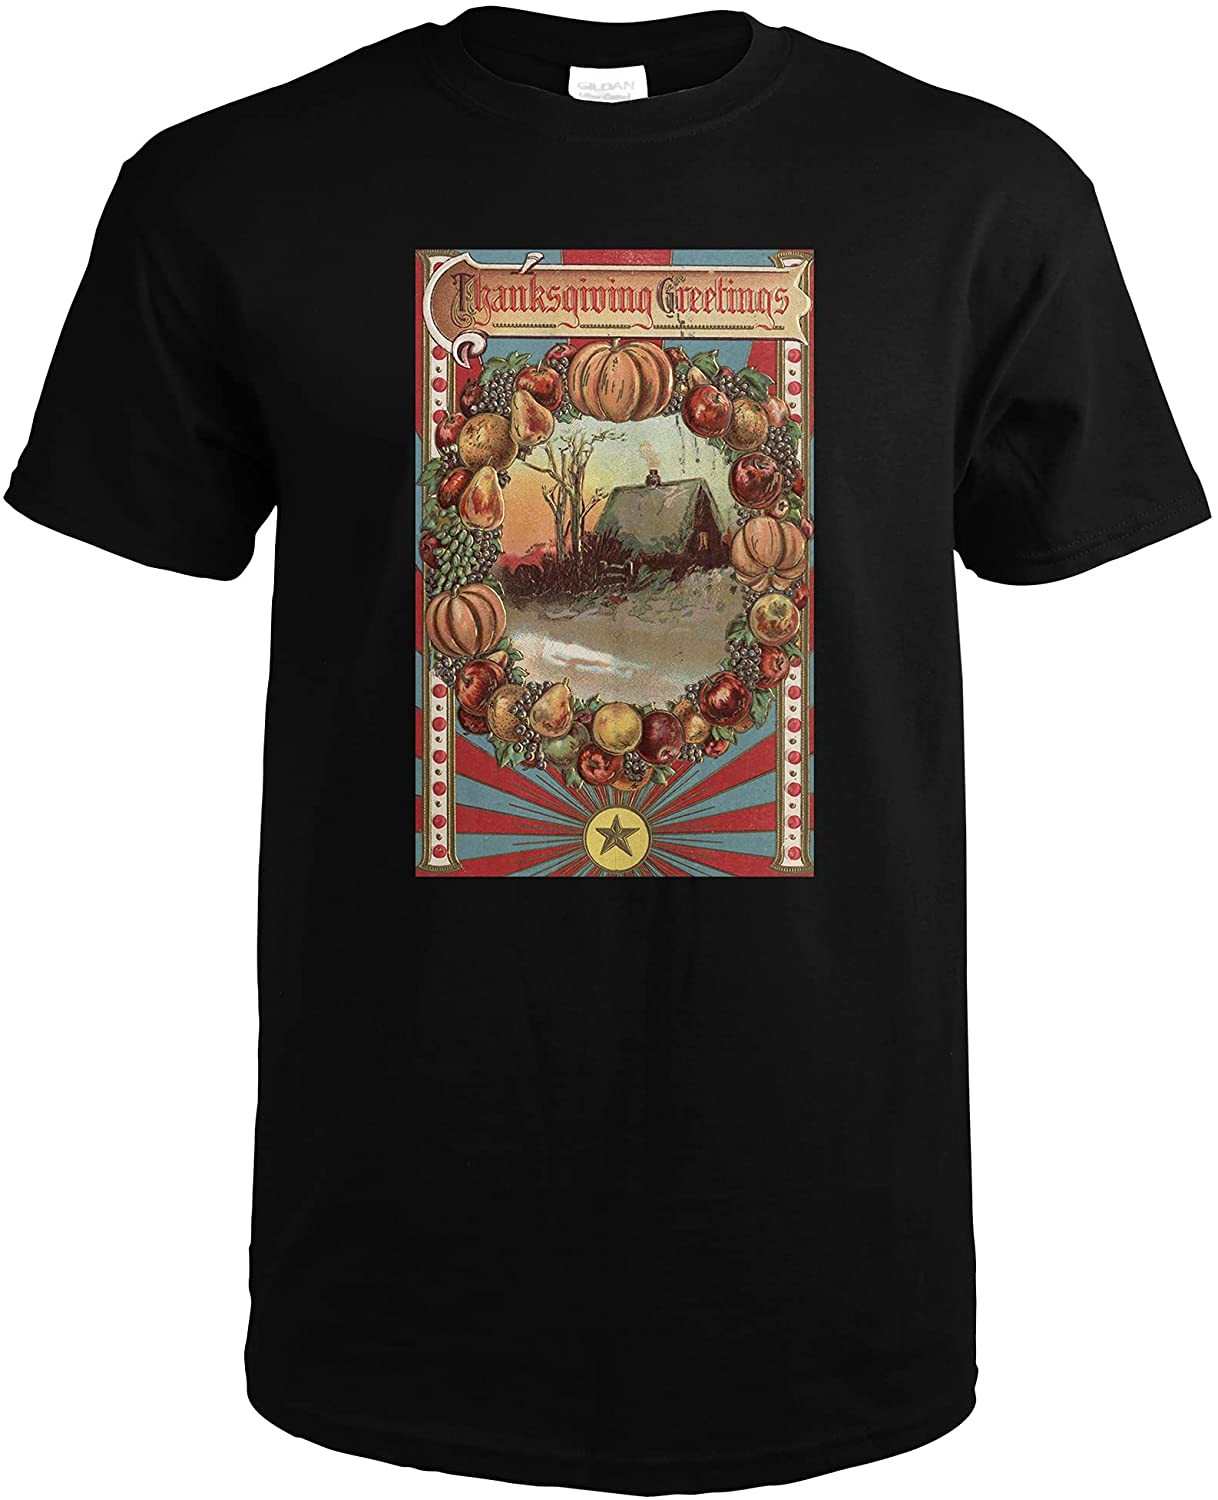 Thanksgiving Greetings, A Country Scene With Produce Border (Premium T-Shirt